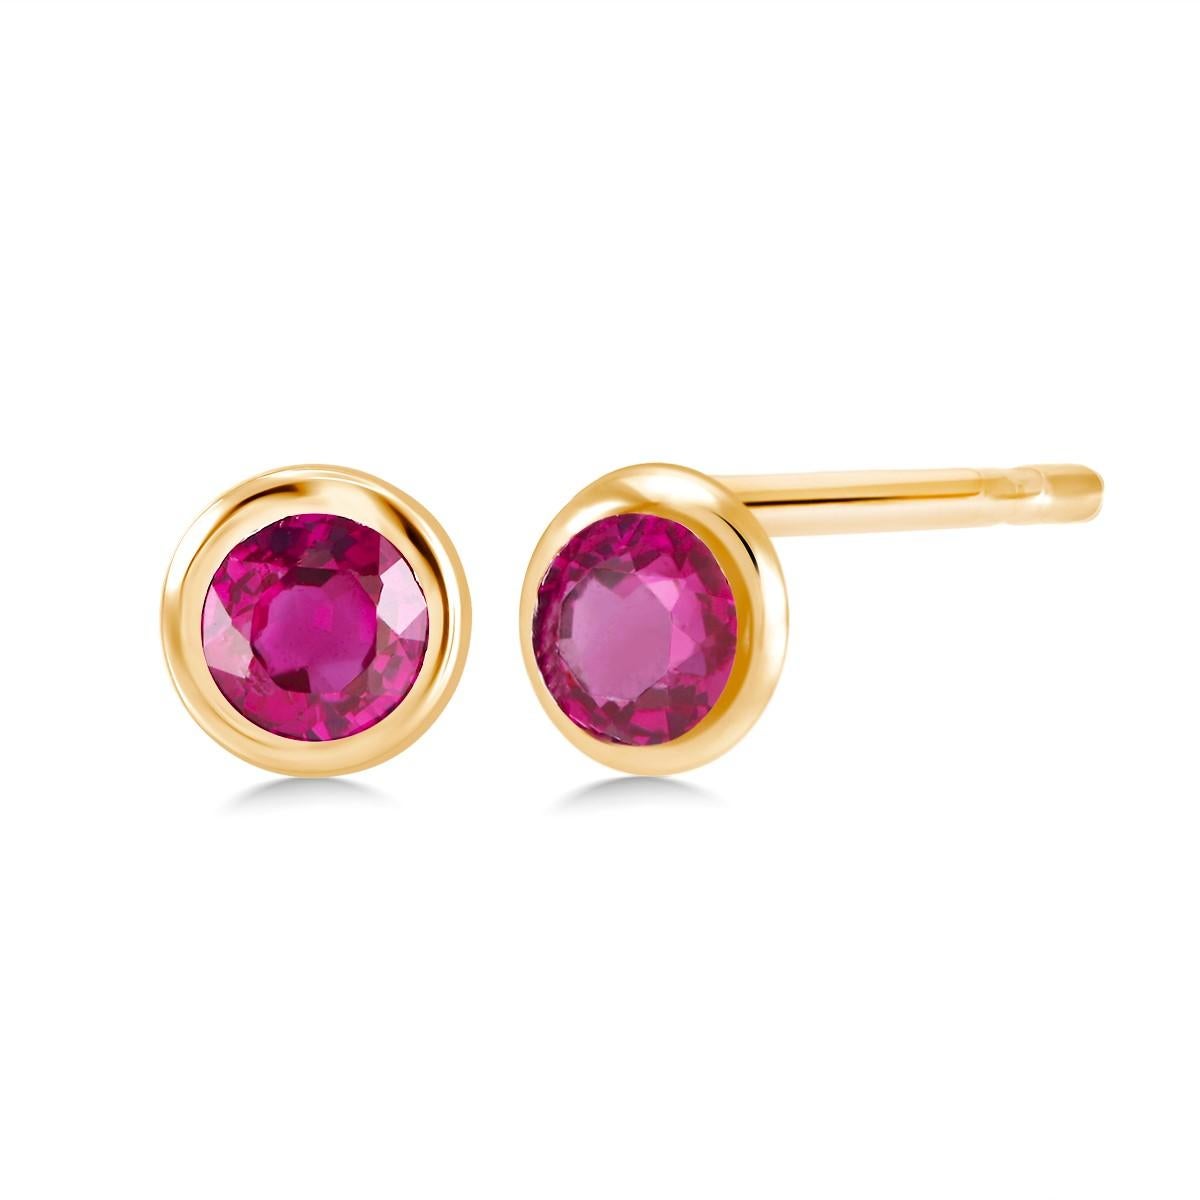 Round Cut Two Matched Burma Rubies Weighing 1.10 Carat Bezel Set Yellow Gold Stud Earrings